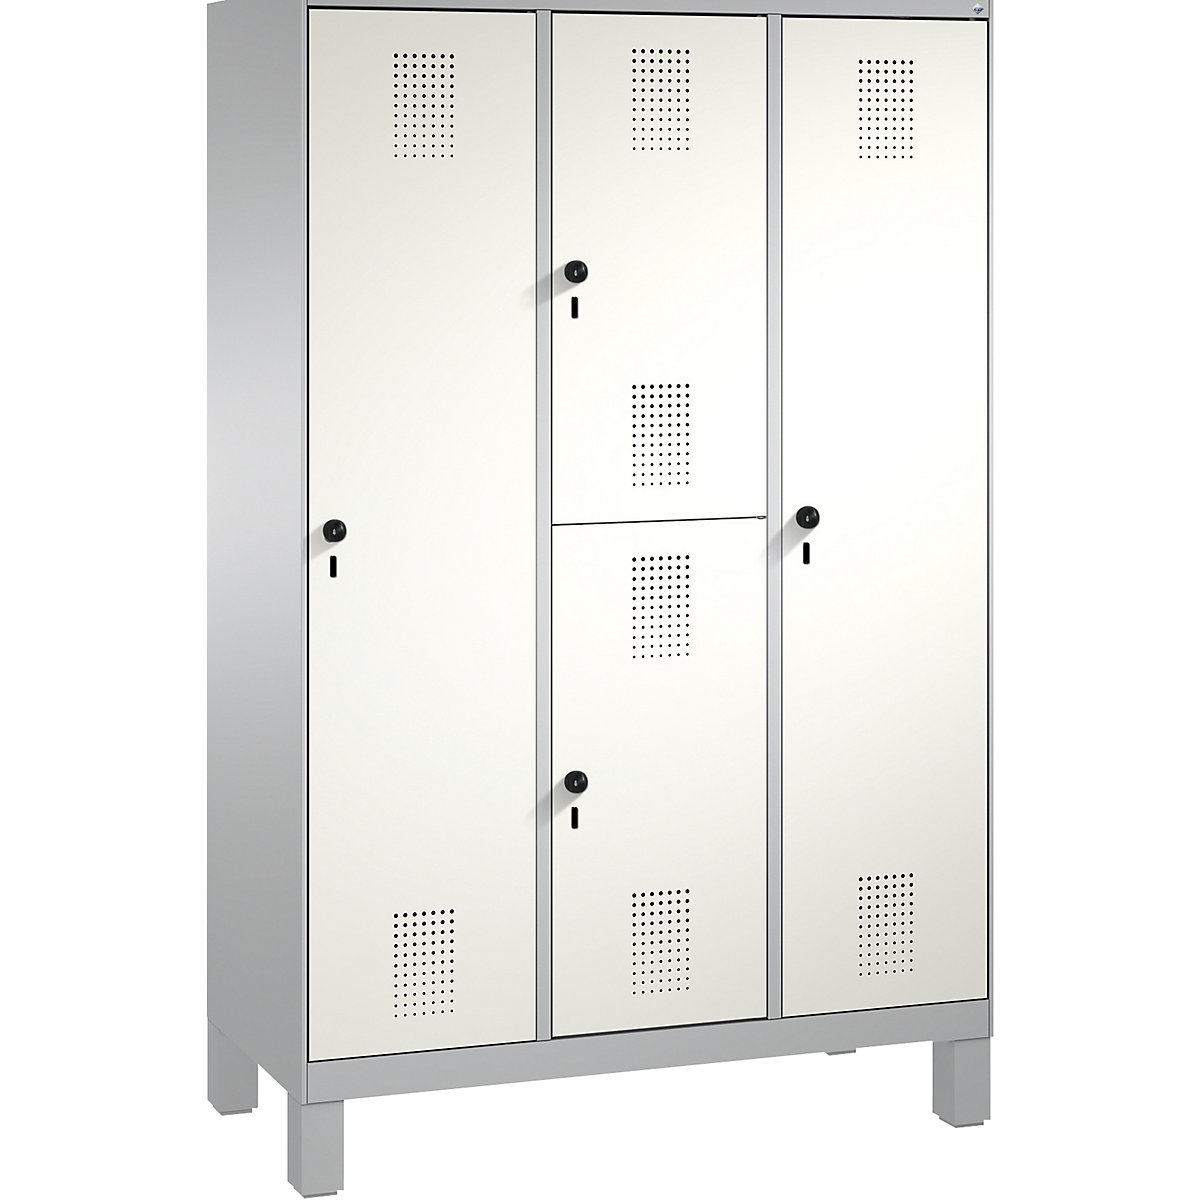 EVOLO combination cupboard, single and double tier – C+P, 3 compartments, 4 doors, compartment width 400 mm, with feet, white aluminium / white aluminium